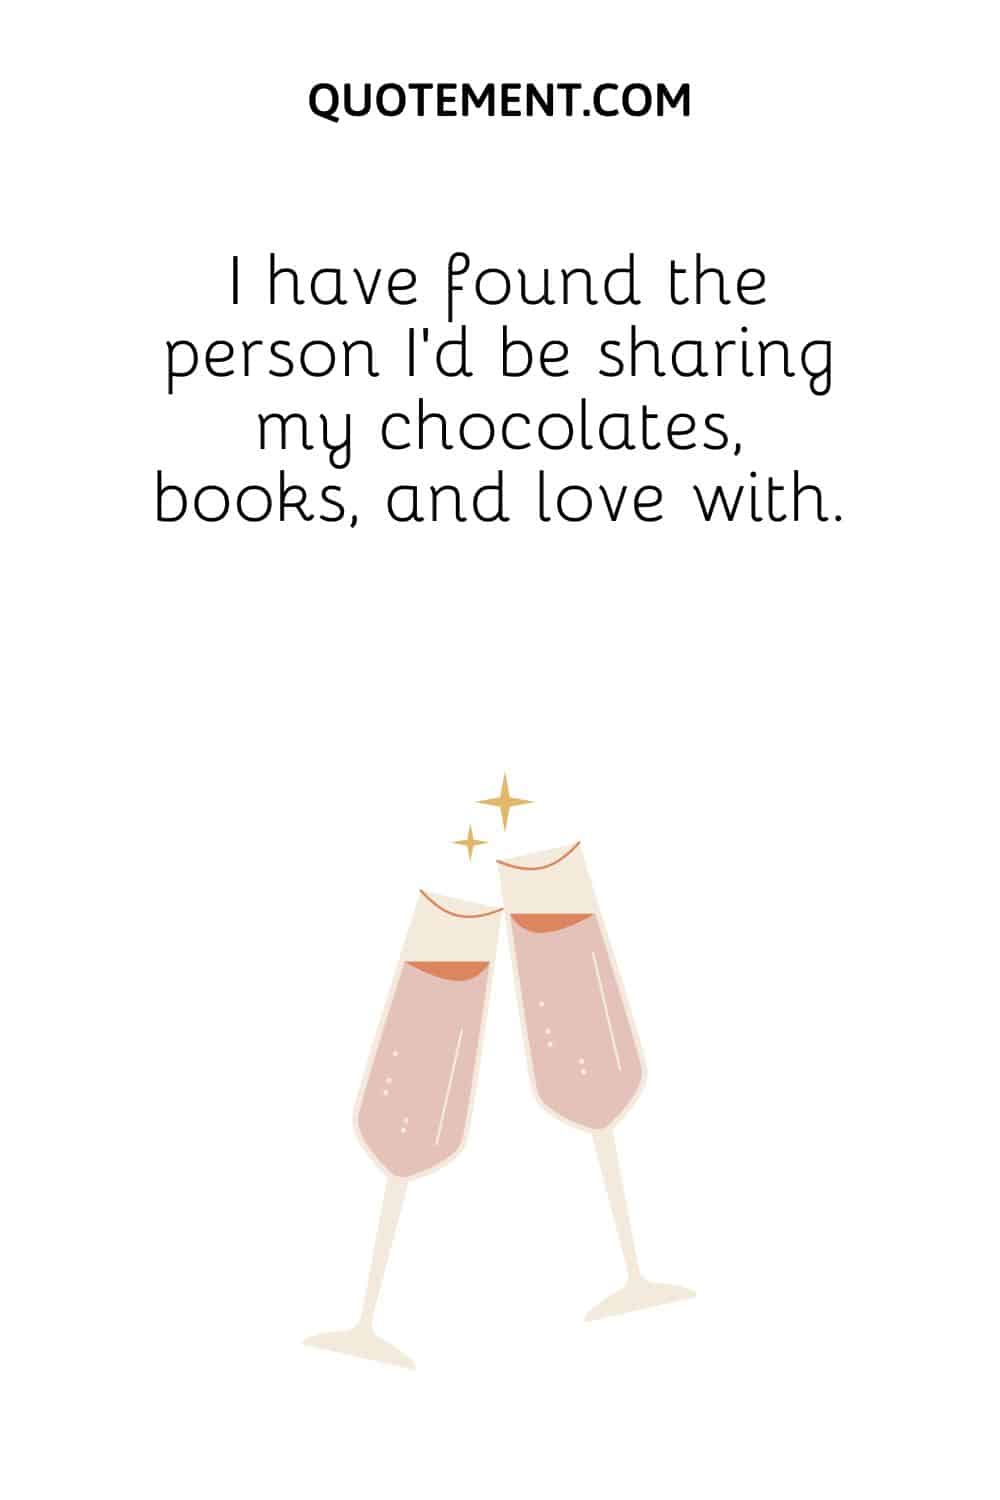 I have found the person I’d be sharing my chocolates, books, and love with.